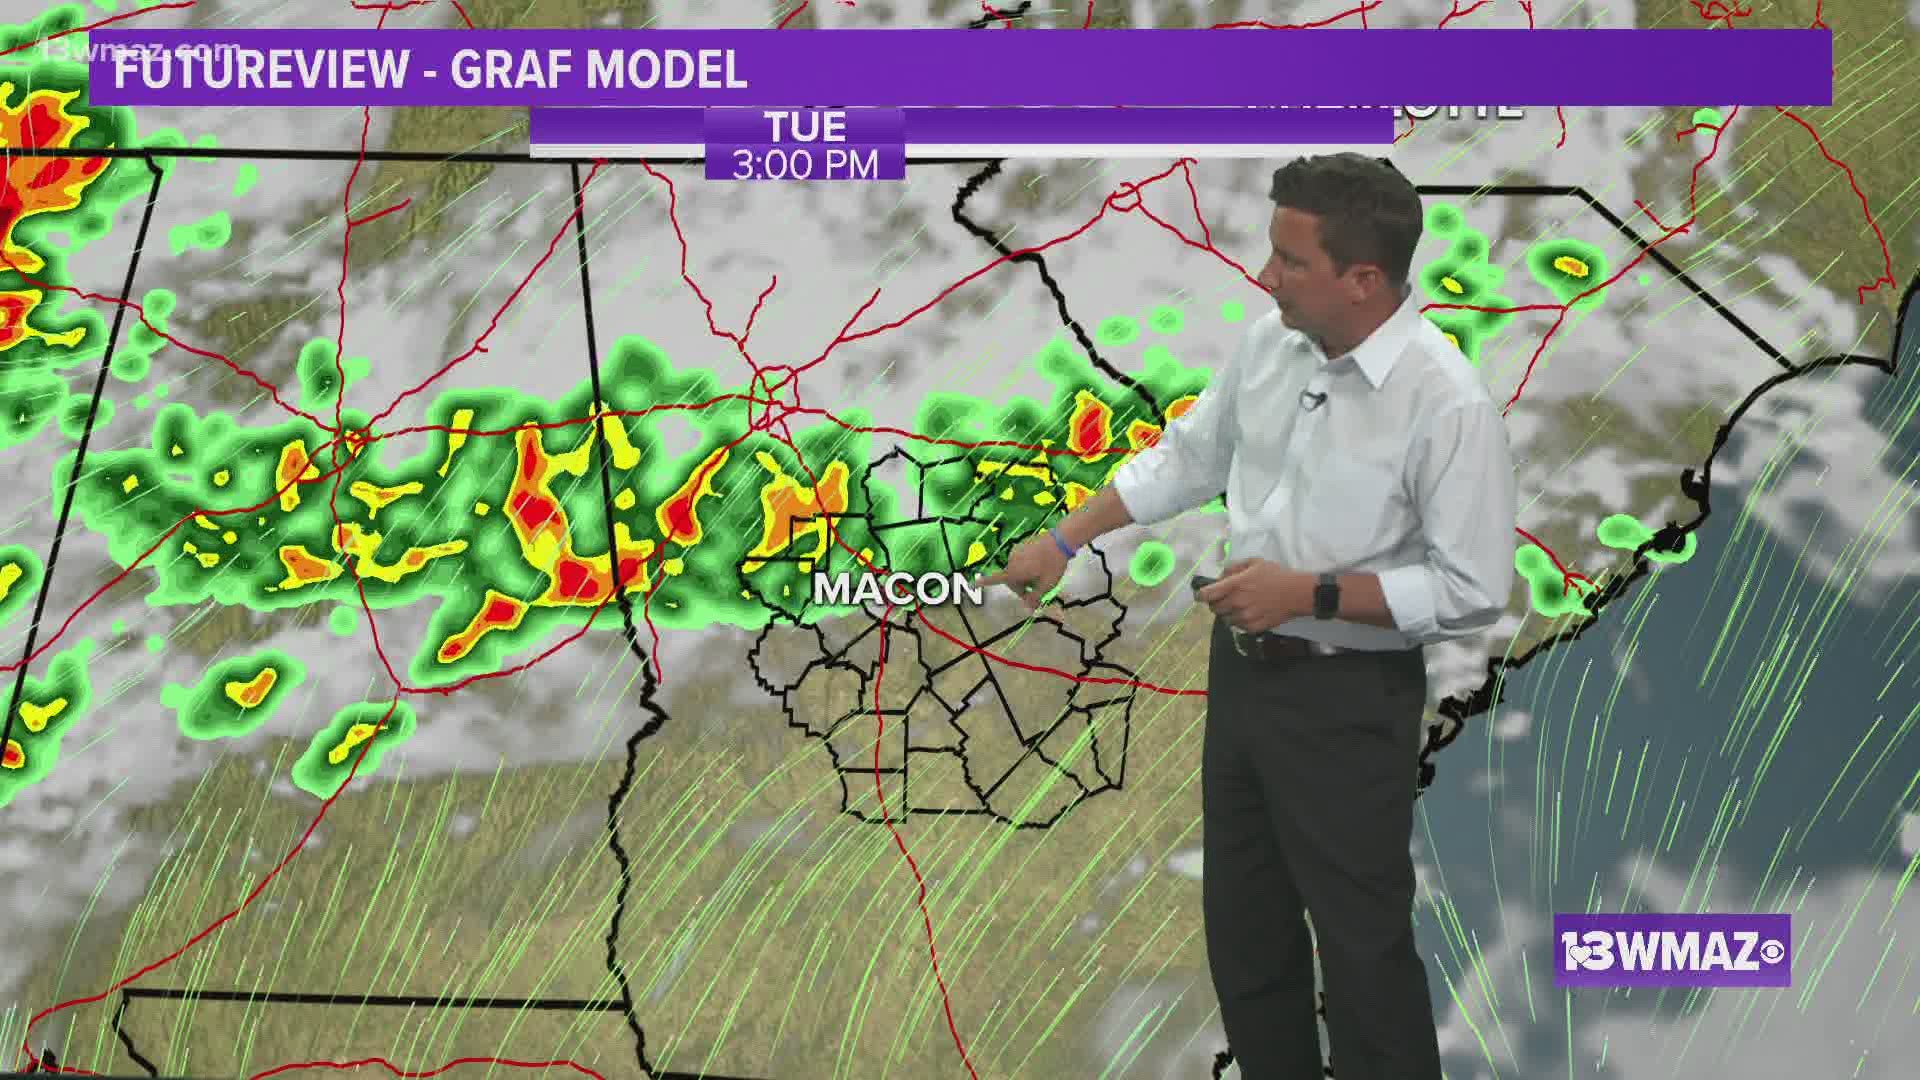 For the most part, the radar should calm down as we head into the later evening, but we will see another round of strong storms for Tuesday afternoon.